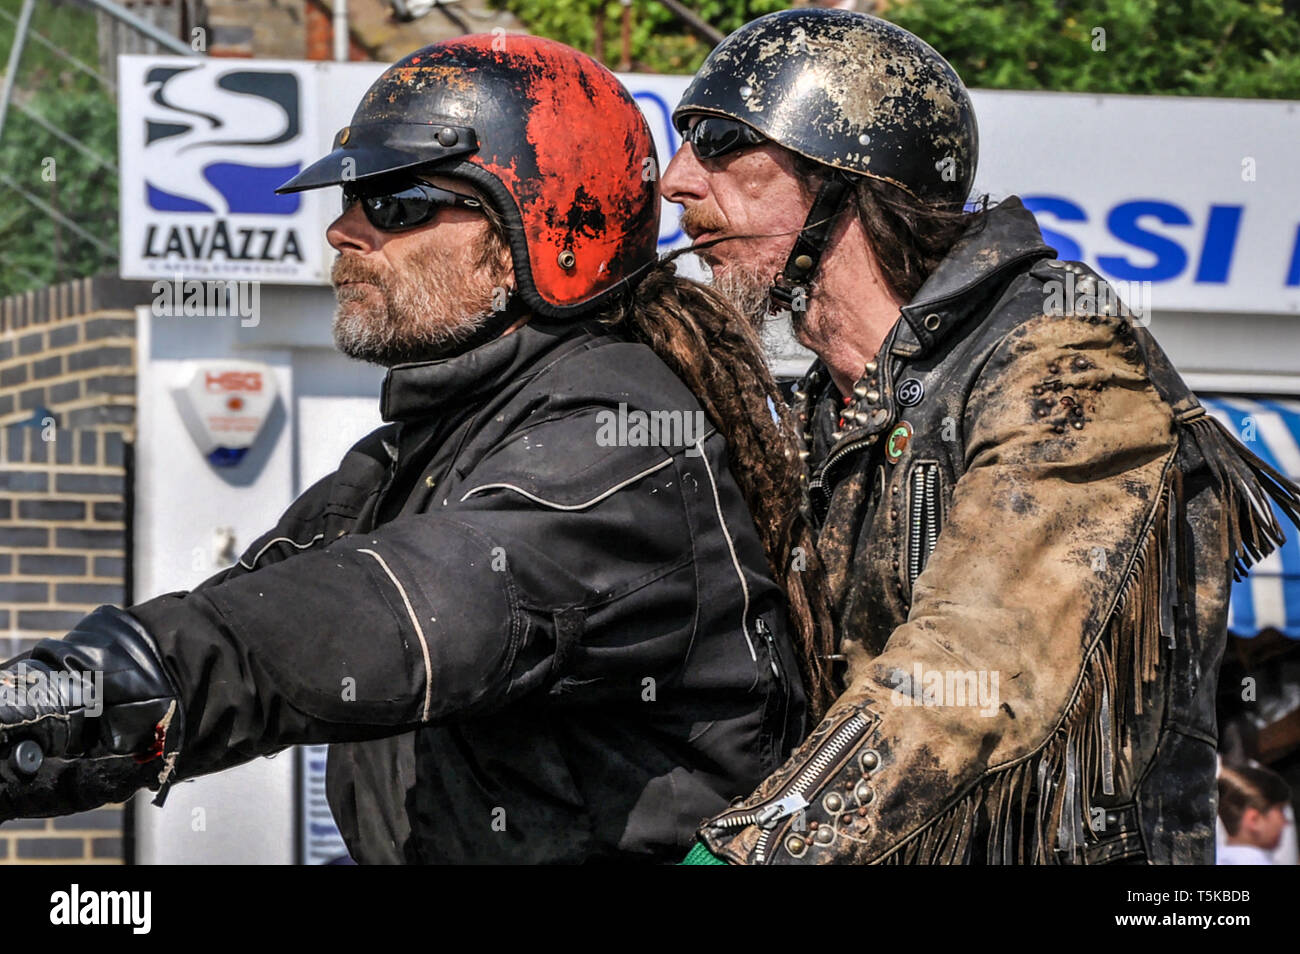 Grizzled rocker bikers at the Southend Shakedown 2014 motorcycle rally, Southend on Sea, Essex, UK. Unshaven character faces. Space for copy Stock Photo